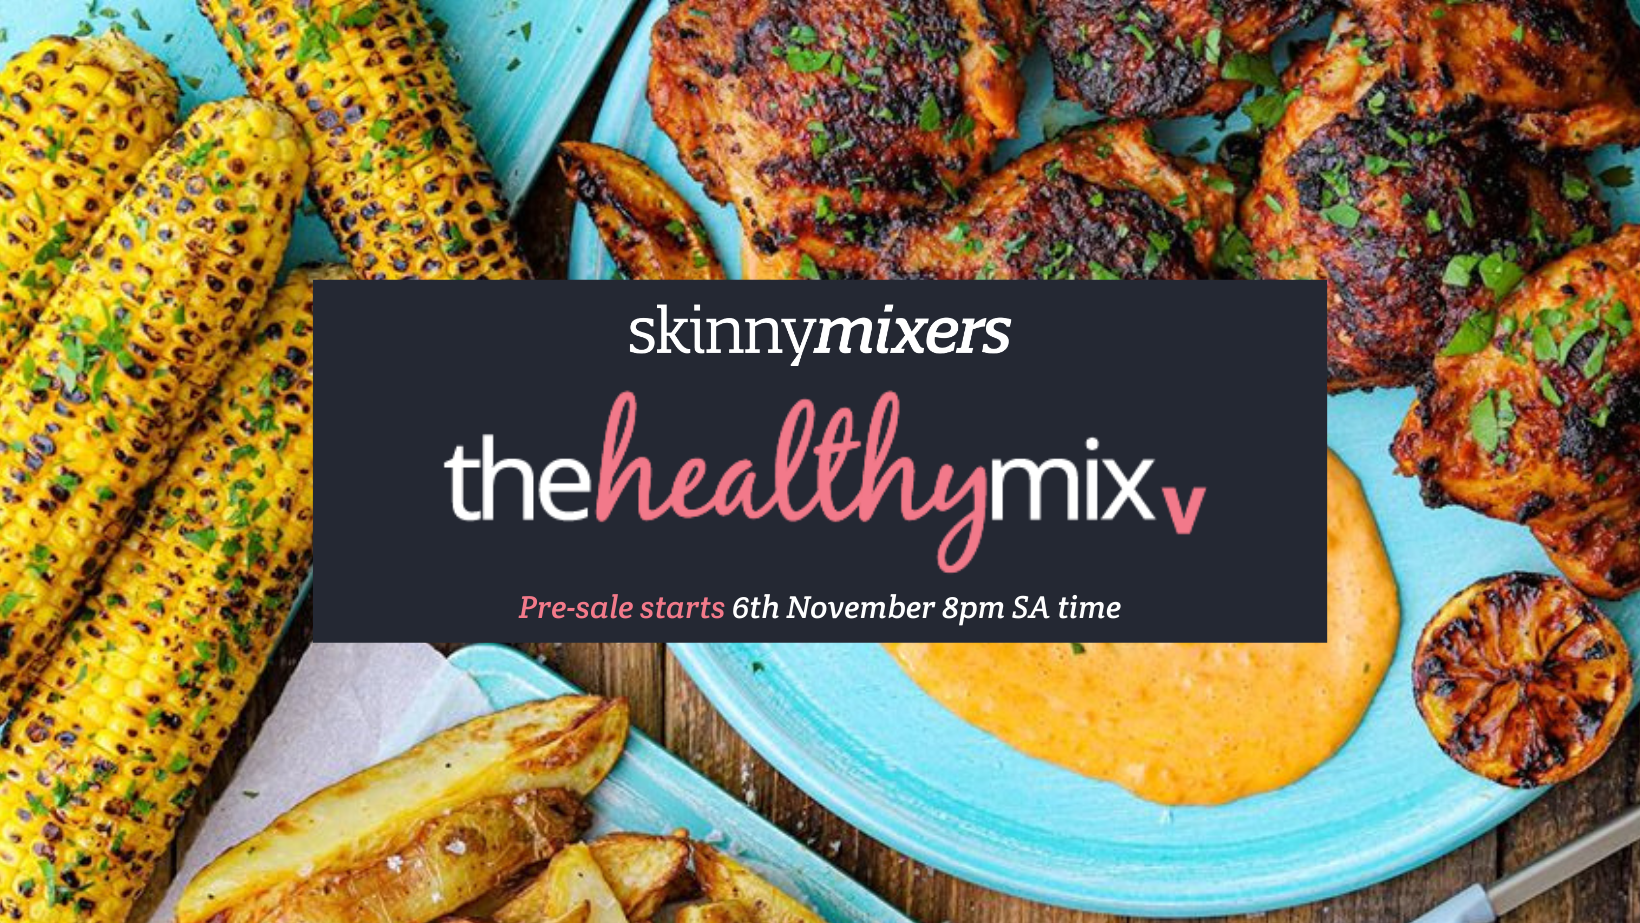 The Healthy Mix V is coming!